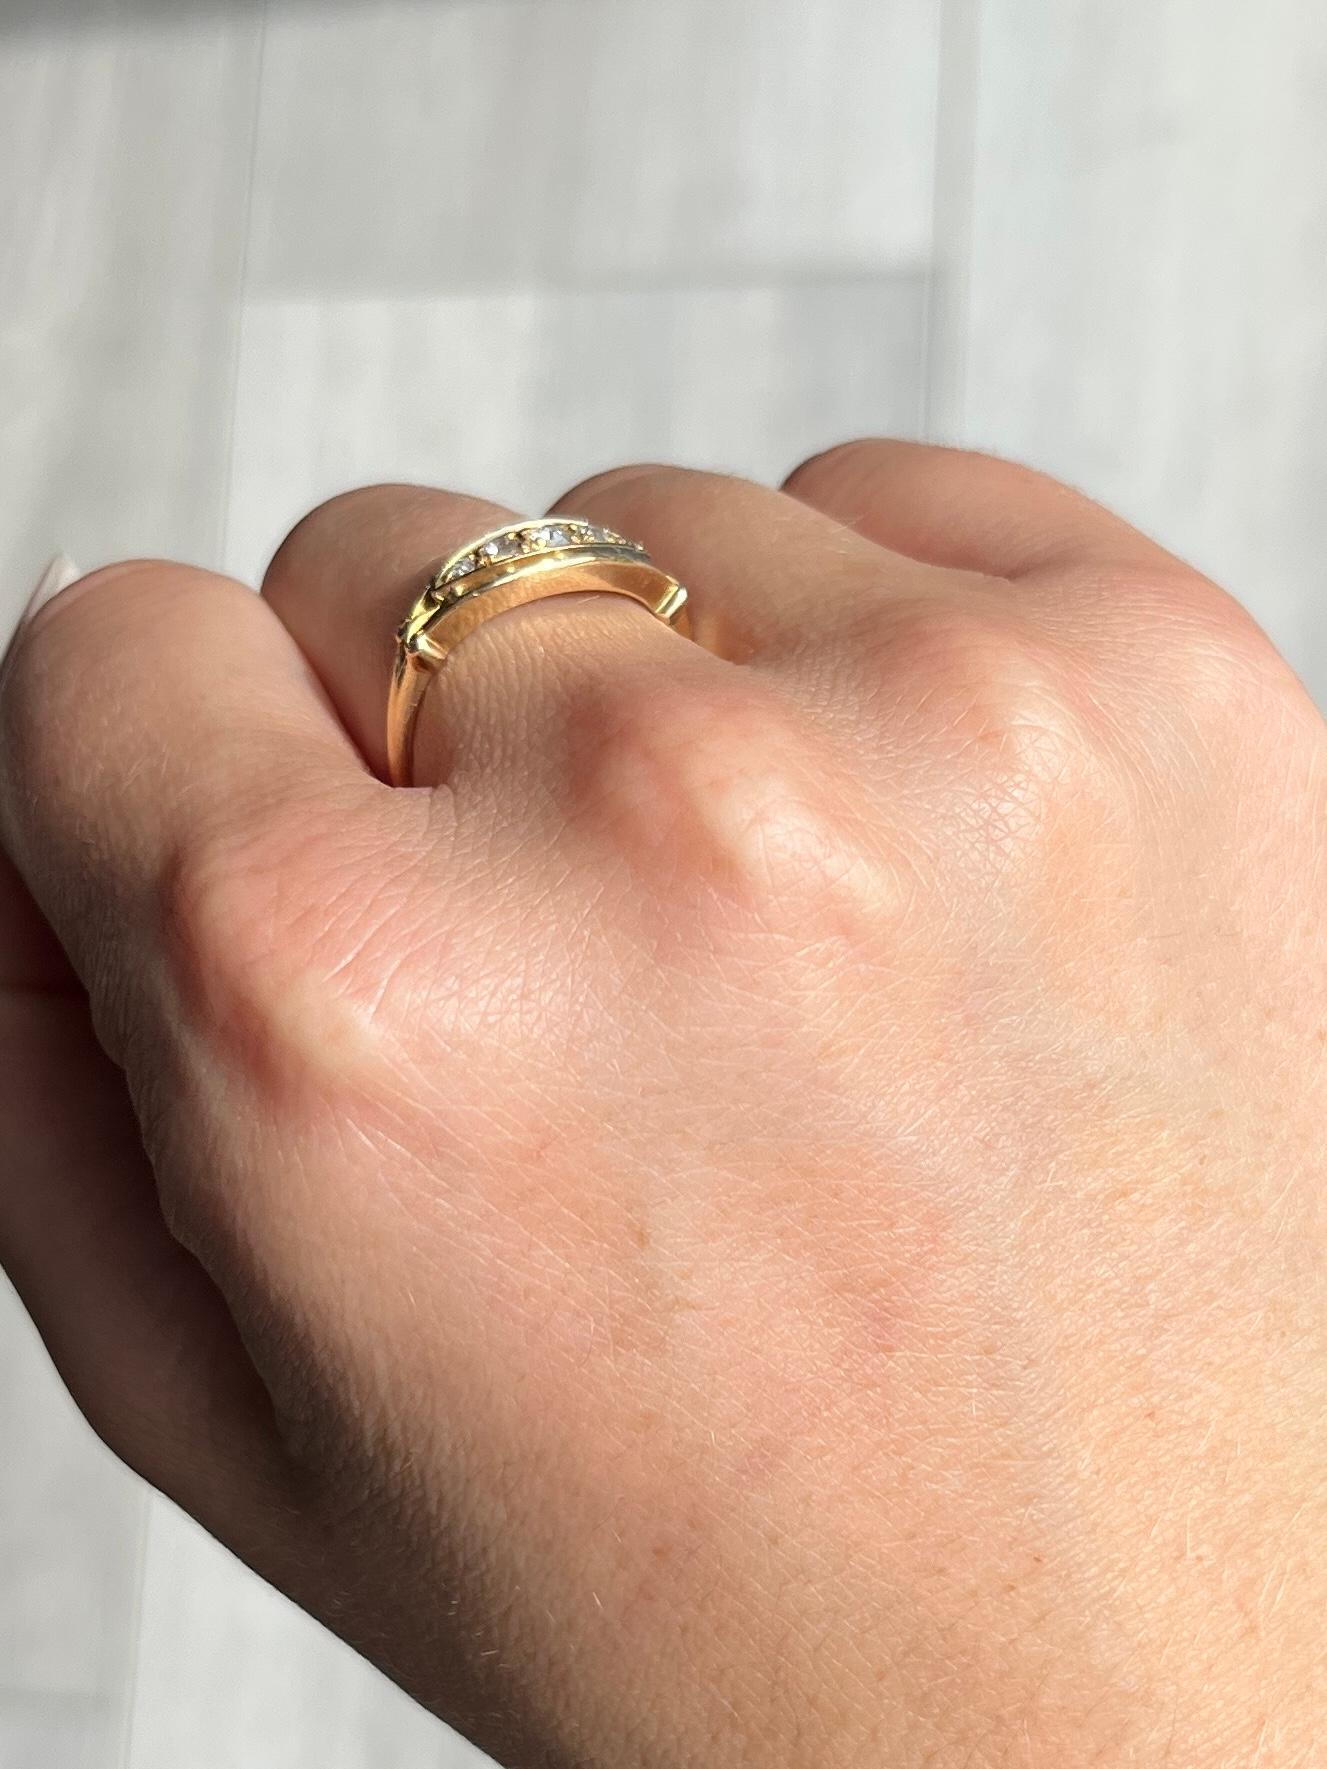 The boat shape setting in this ring holds a total of 5 diamonds measuring 7pts at the centre, 5pts and down to 3pts being the smallest size stone. Around the setting there is open work gold and the shoulders are split then carry on down to the plain